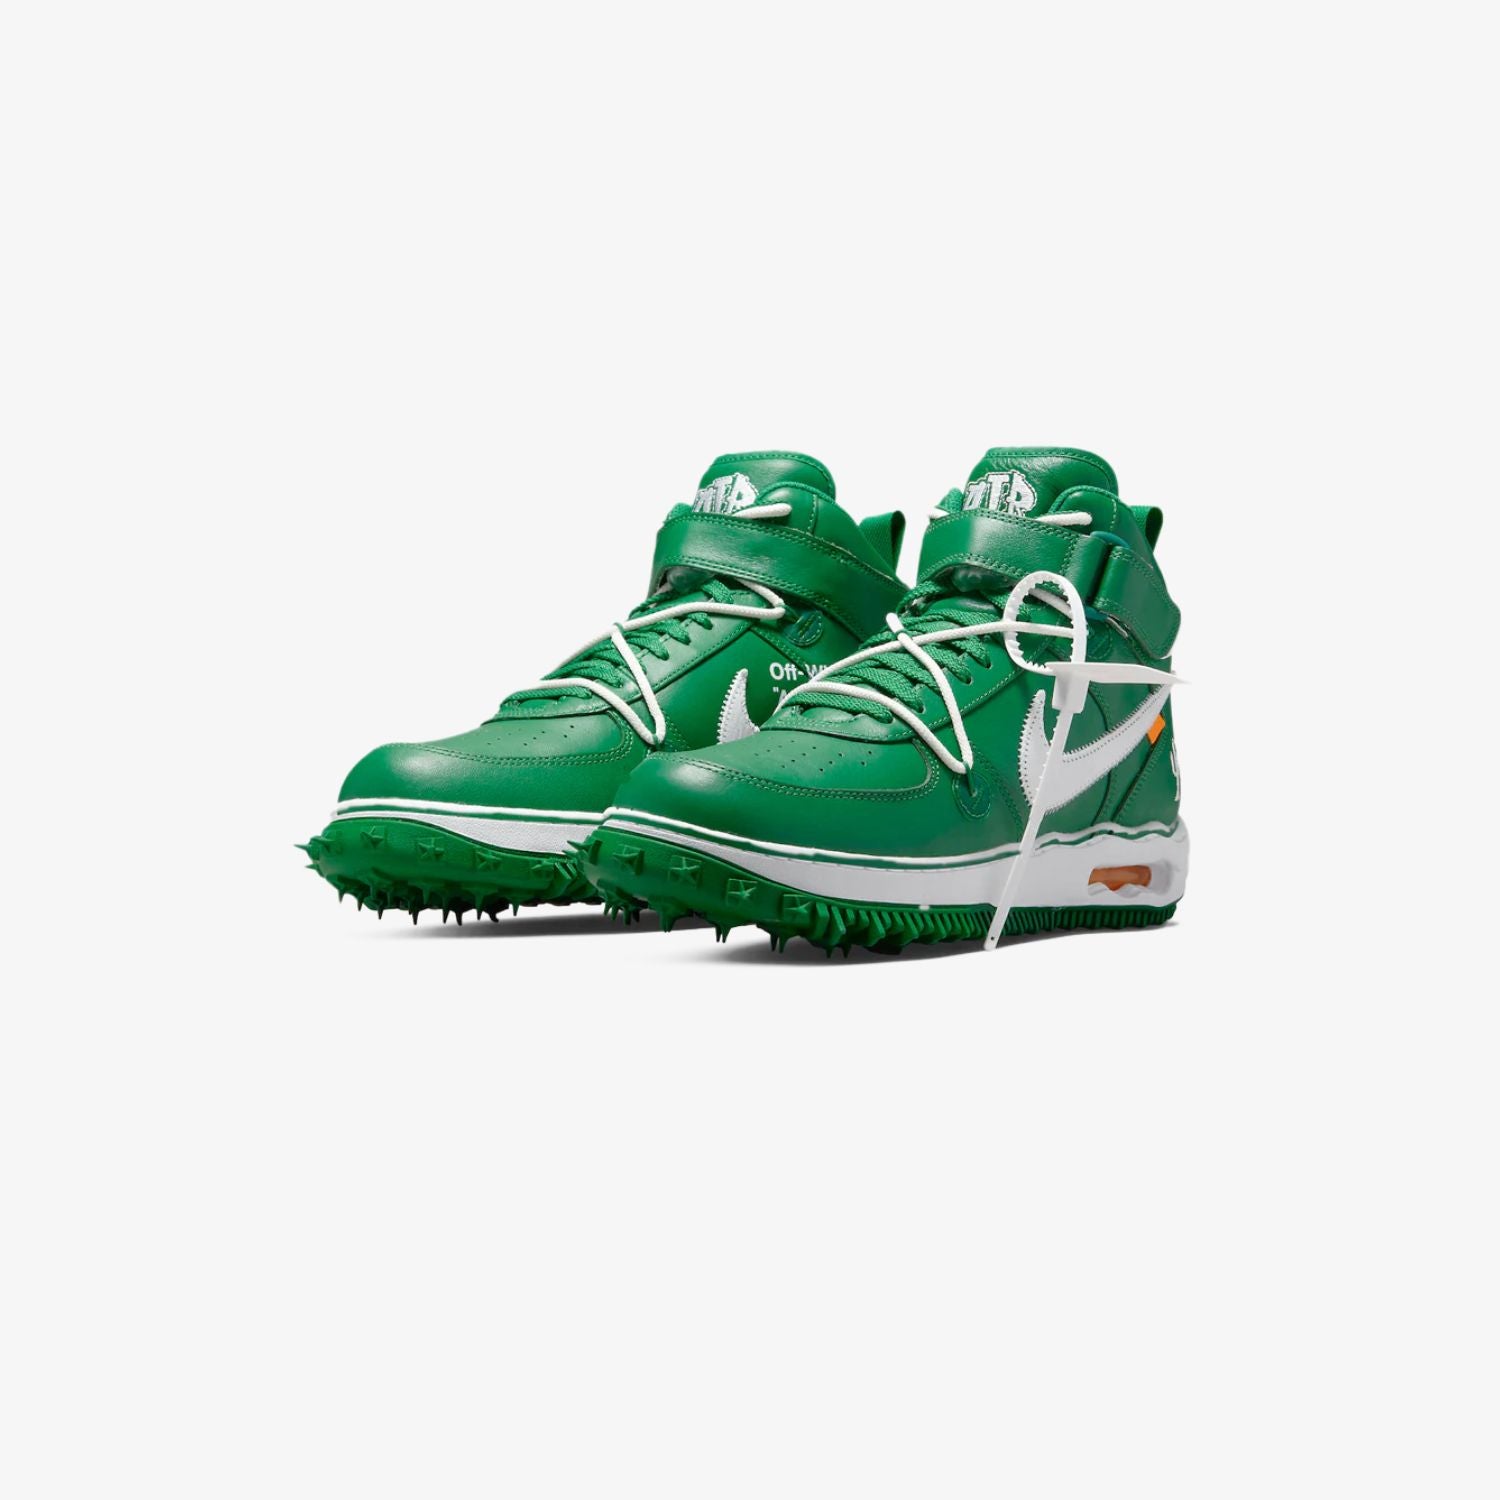 off-white-nike-air-force-1-pine-green-DR0500-300-unfazed-2_1